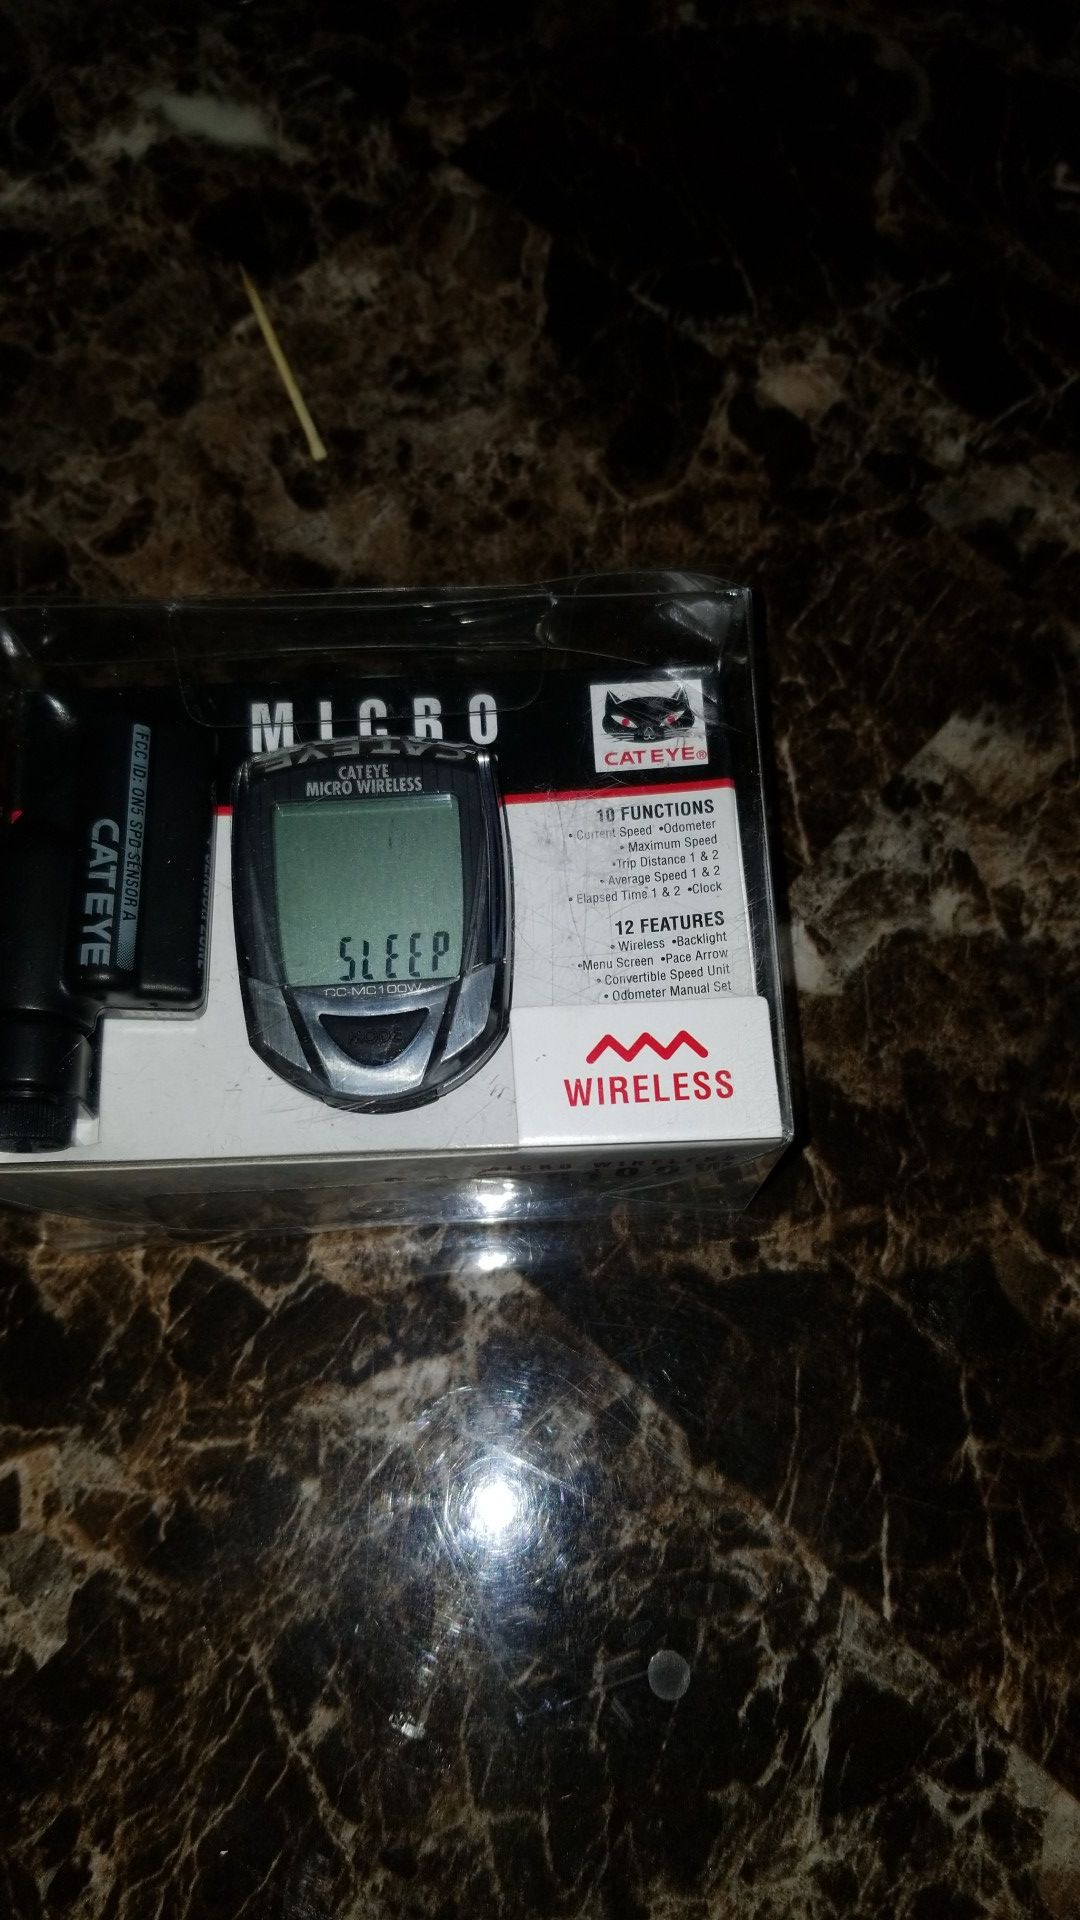 Cateye micro wireless road bike speed and distance meter new